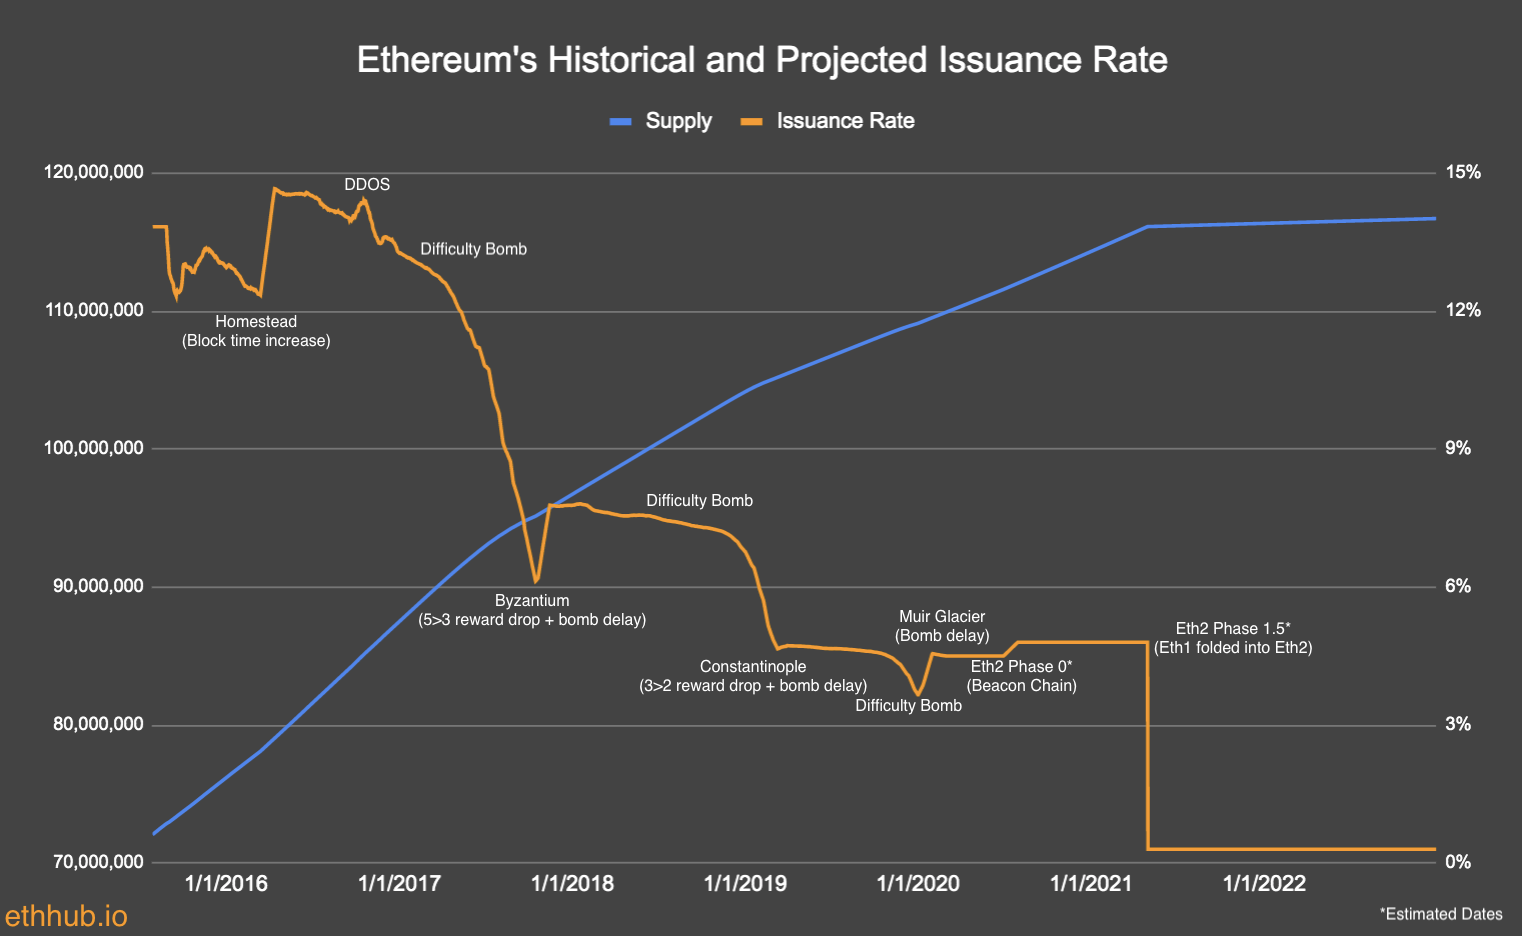 Ethereum's Historical and projected issuance rate